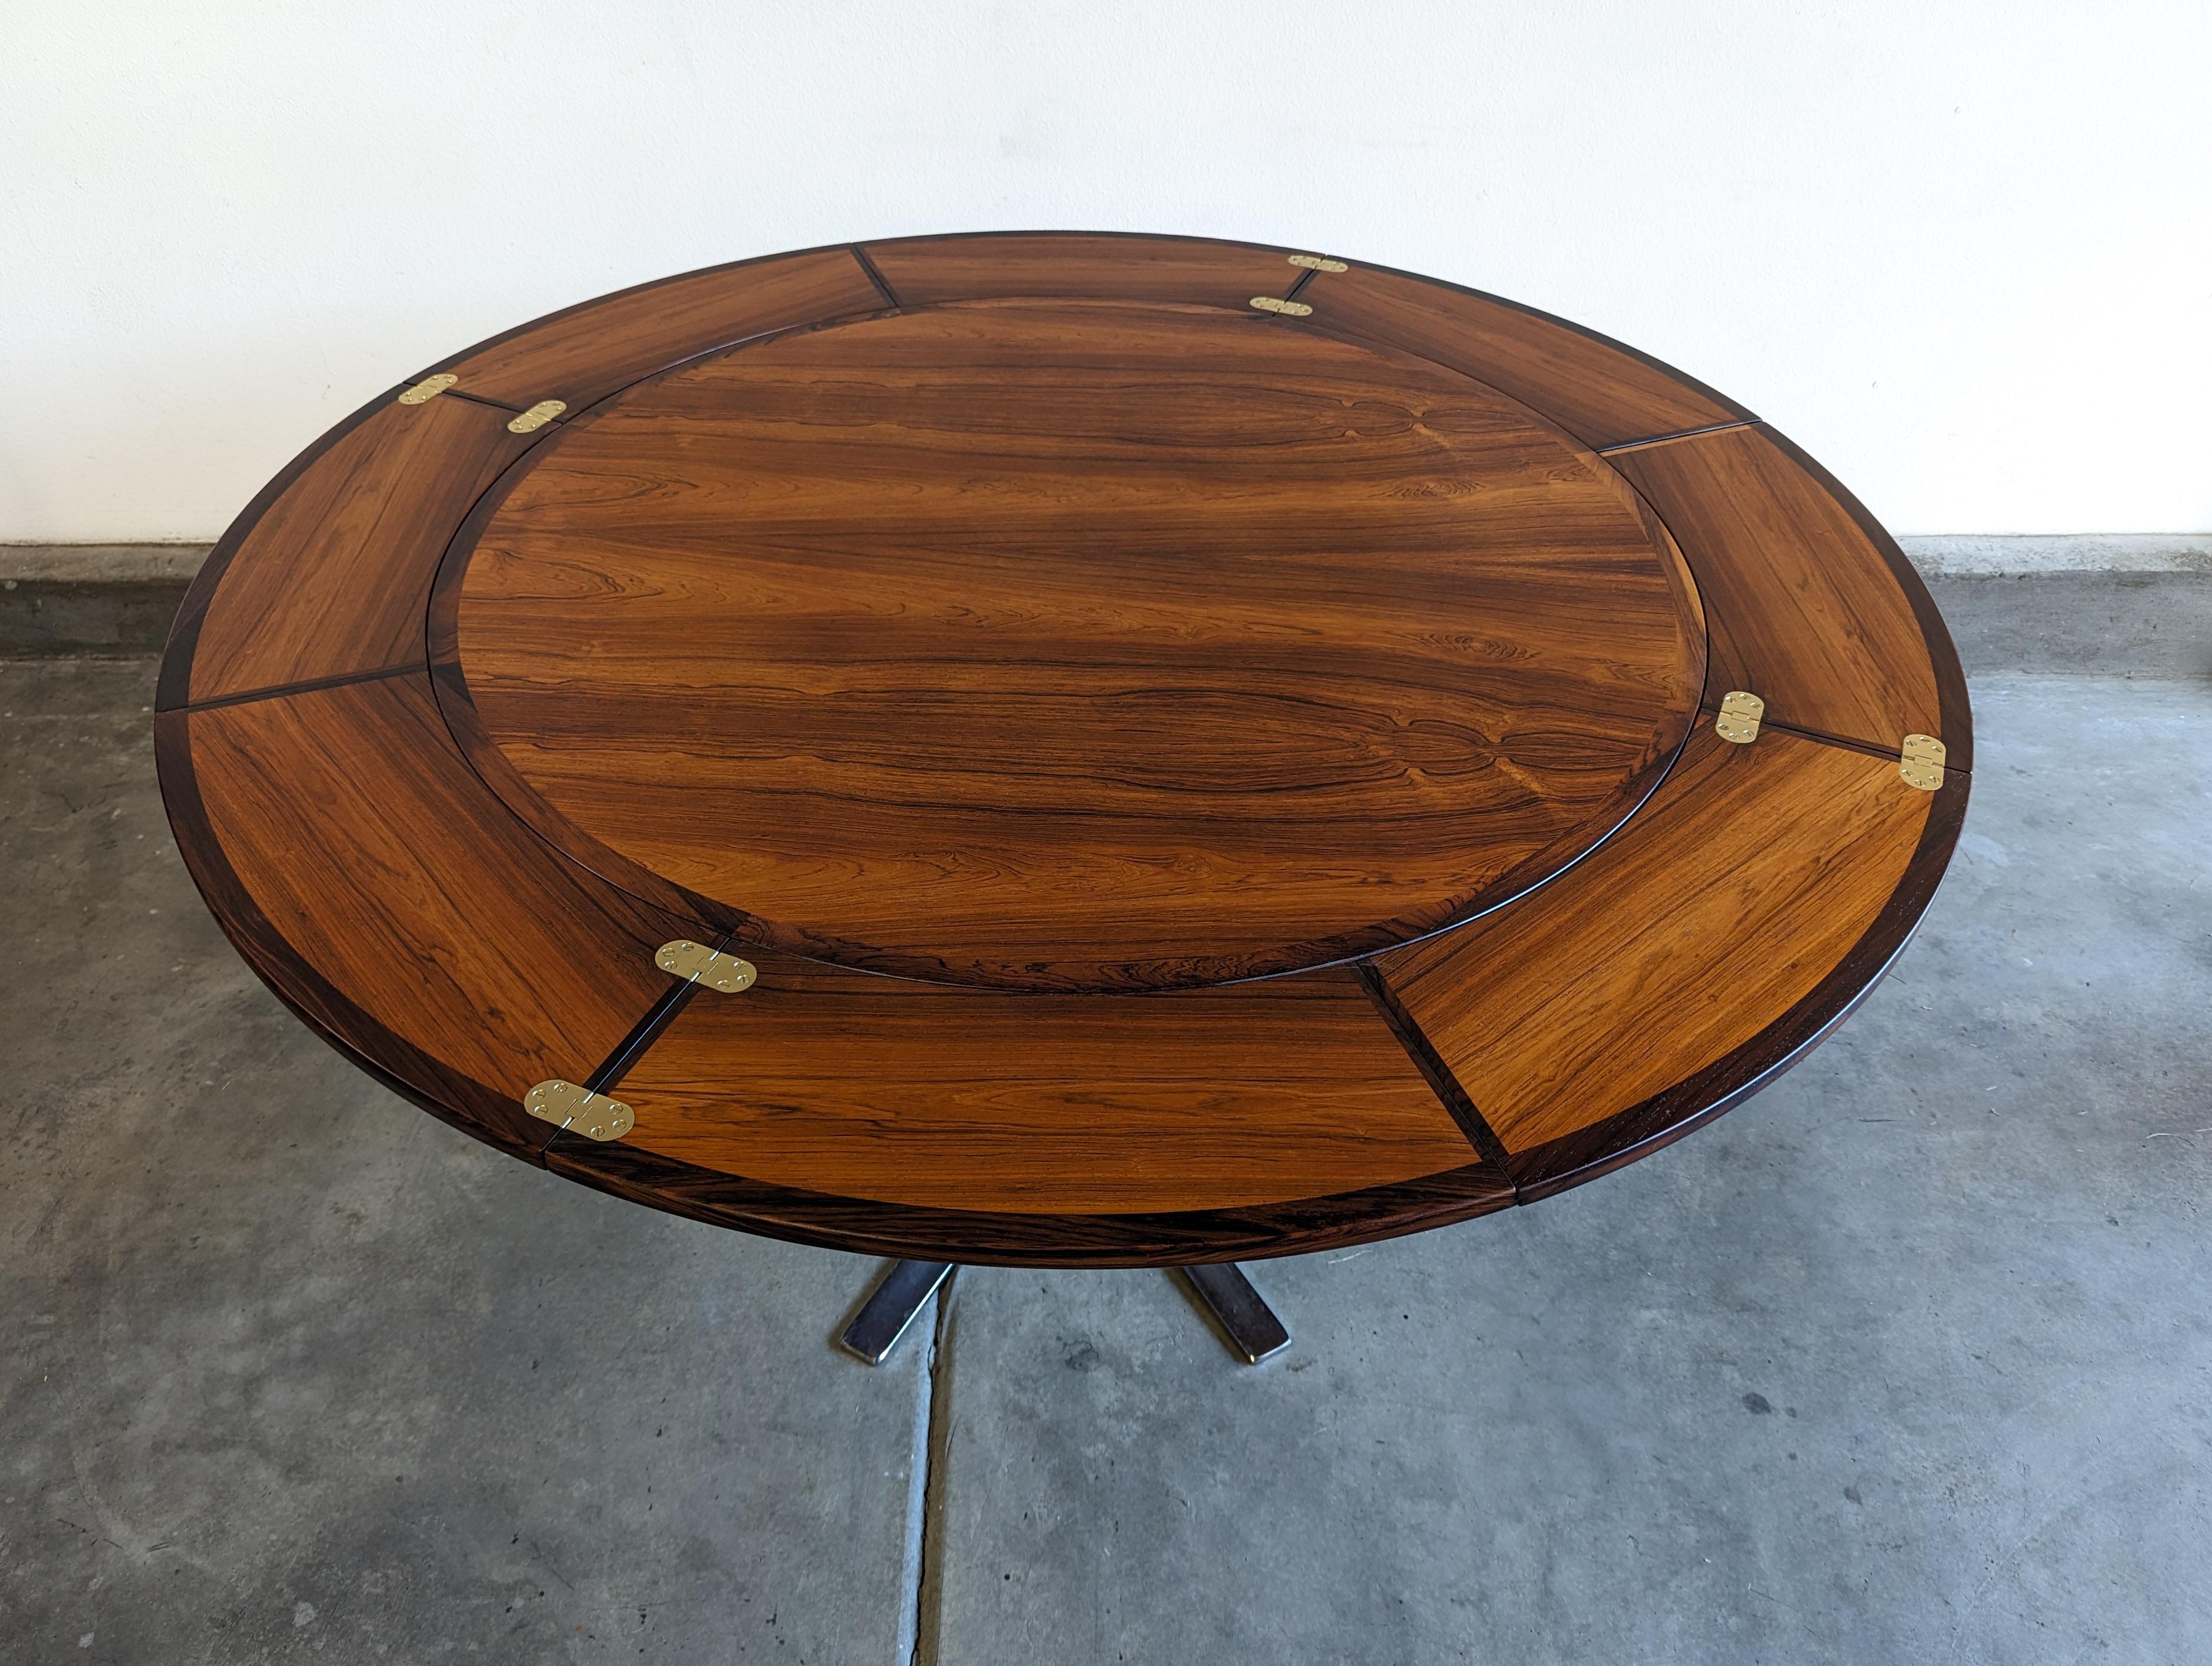 Danish Mid Century Rosewood Flip Flap Circular Dining Table by Dyrlund, c1960s For Sale 1